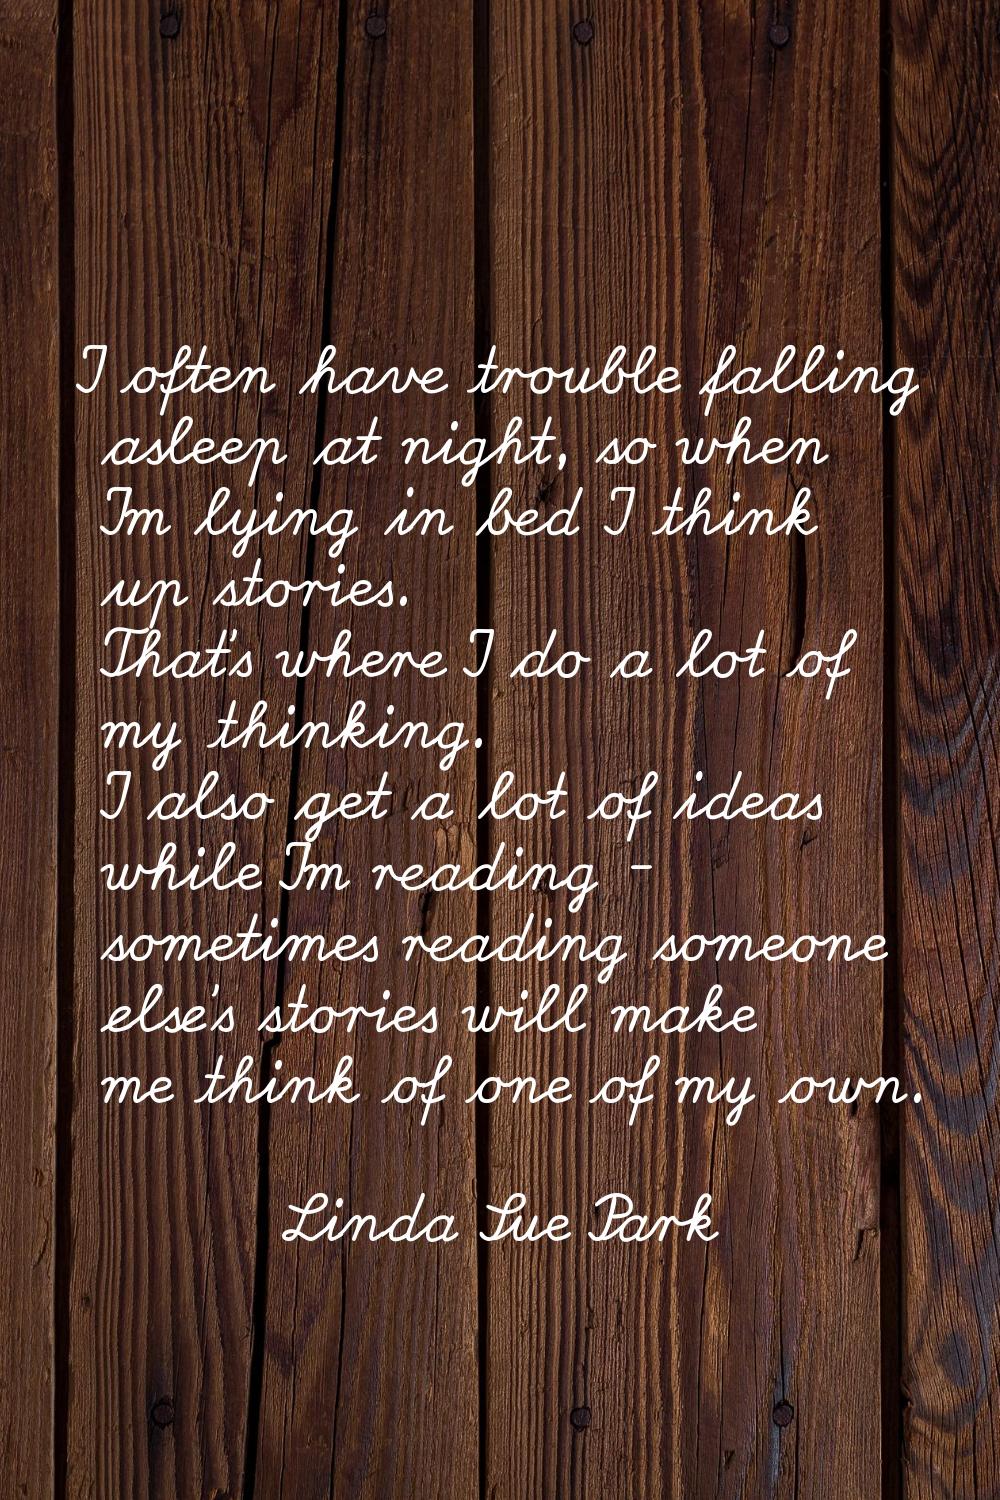 I often have trouble falling asleep at night, so when I'm lying in bed I think up stories. That's w